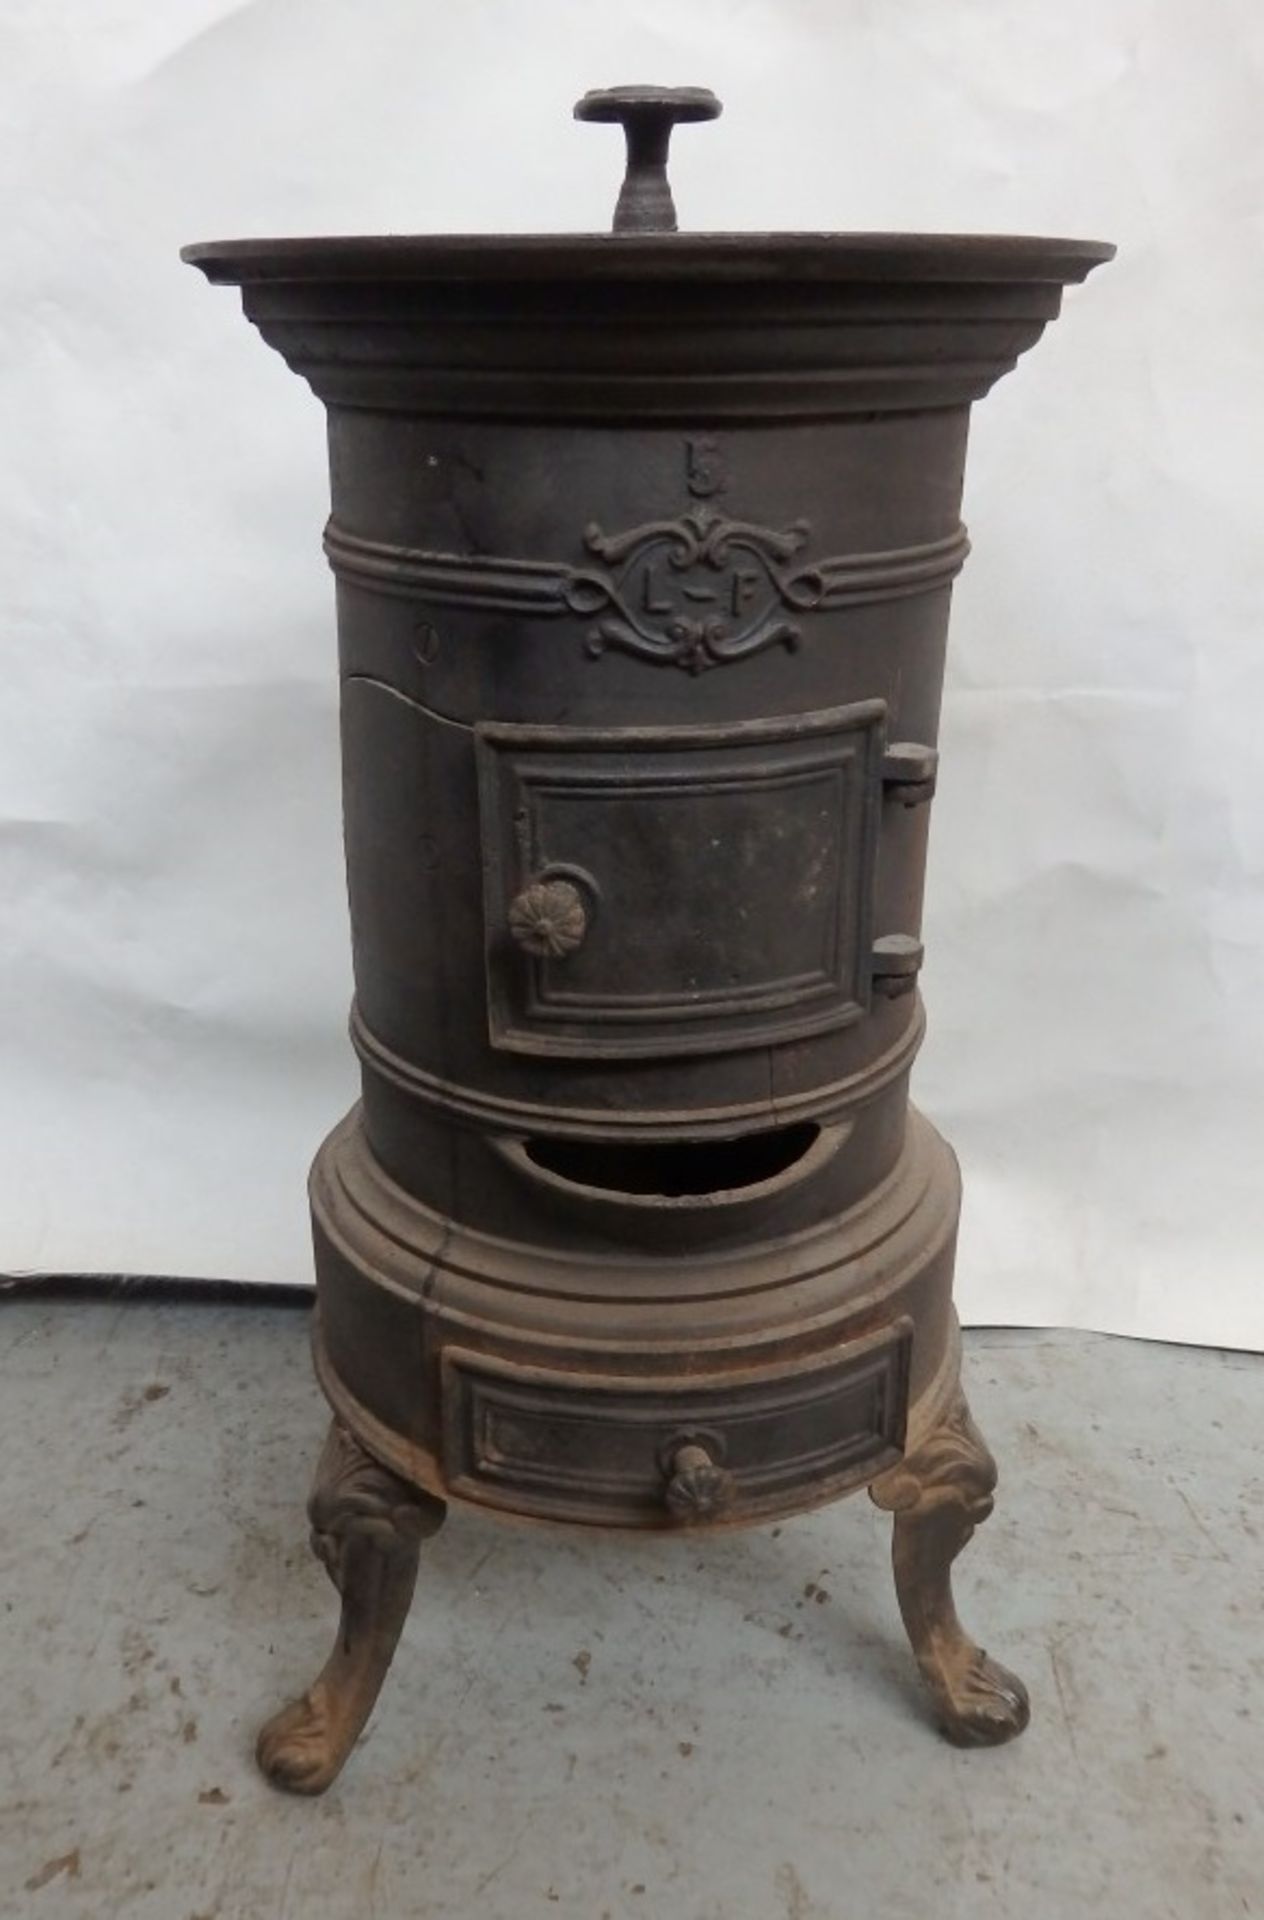 1 x Reclaimed Antique Cast Iron Potbelly Wood Burner / Stove - Dimensions: H61, Diameter 30cm - - Image 9 of 18